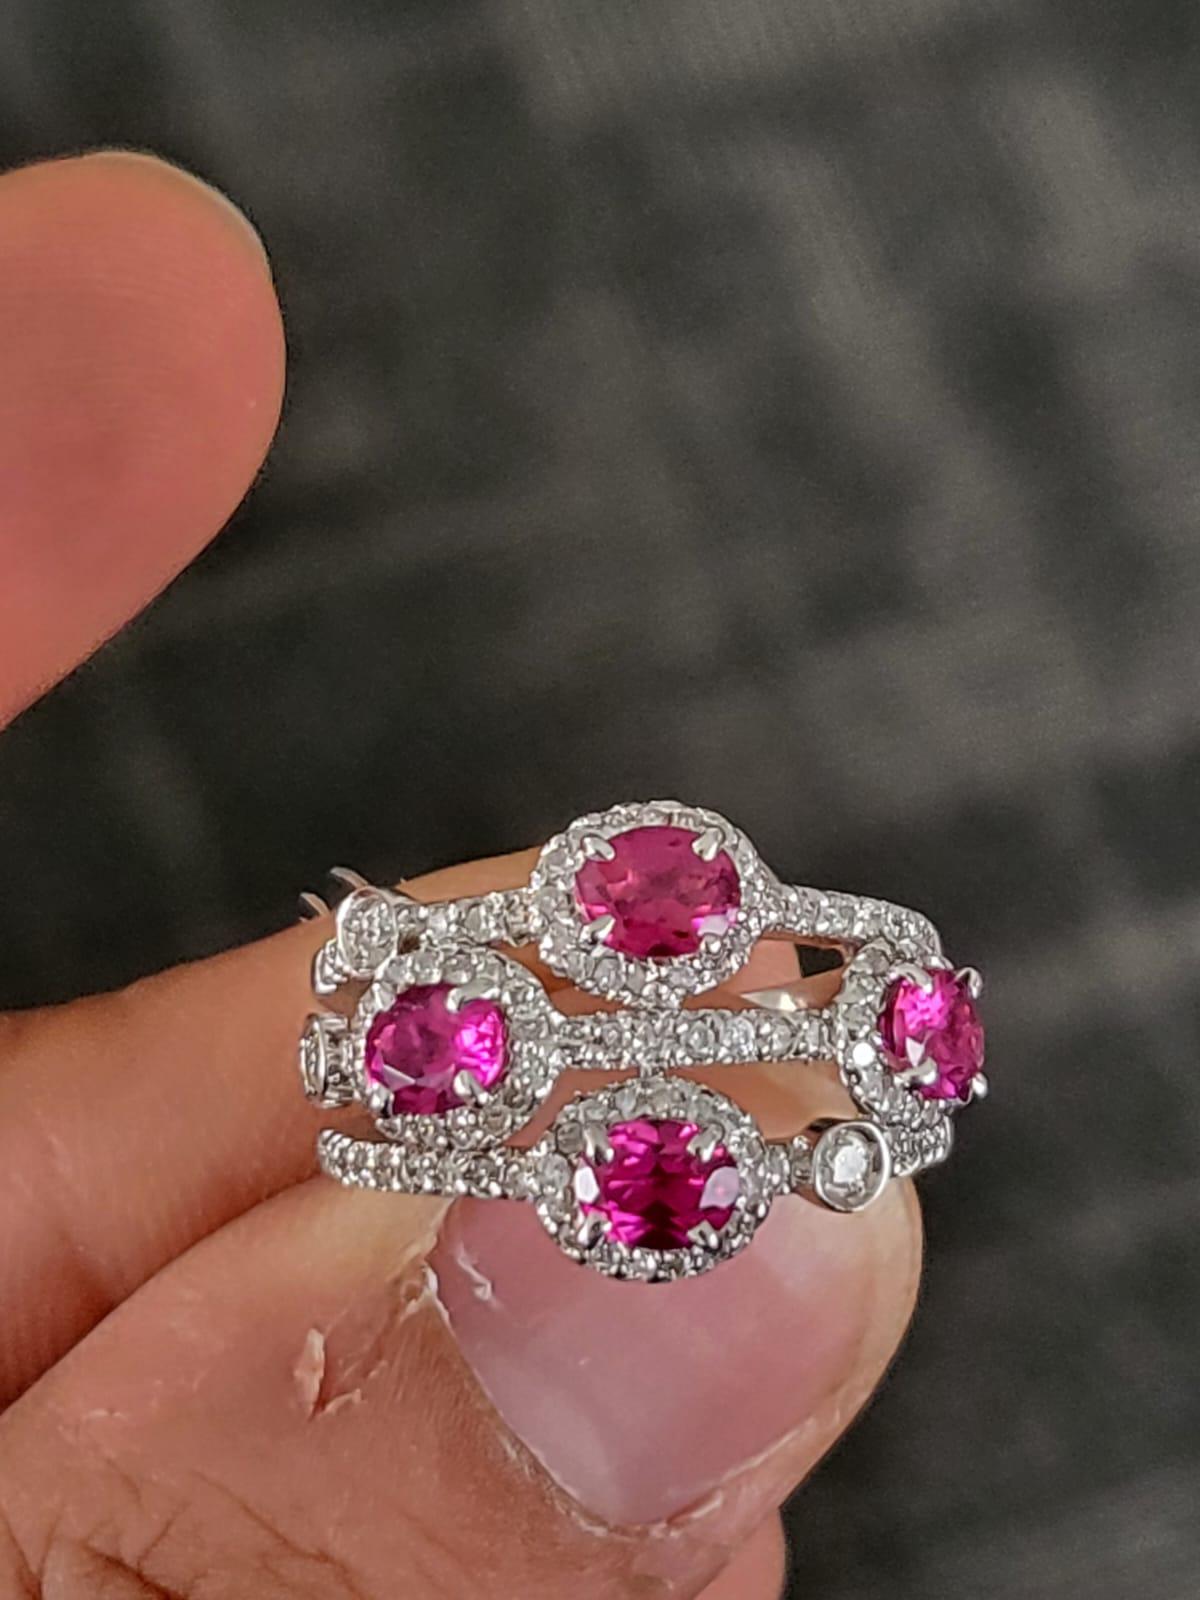 A very gorgeous and beautiful, Rubellite Engagement / Cocktail Ring set in 18K Gold & Diamonds. The weight of the Rubellite is 1.41 carats. The weight of the Diamonds is 0.70 carats. Net Gold weight is 6.78 grams. The dimensions of the ring are